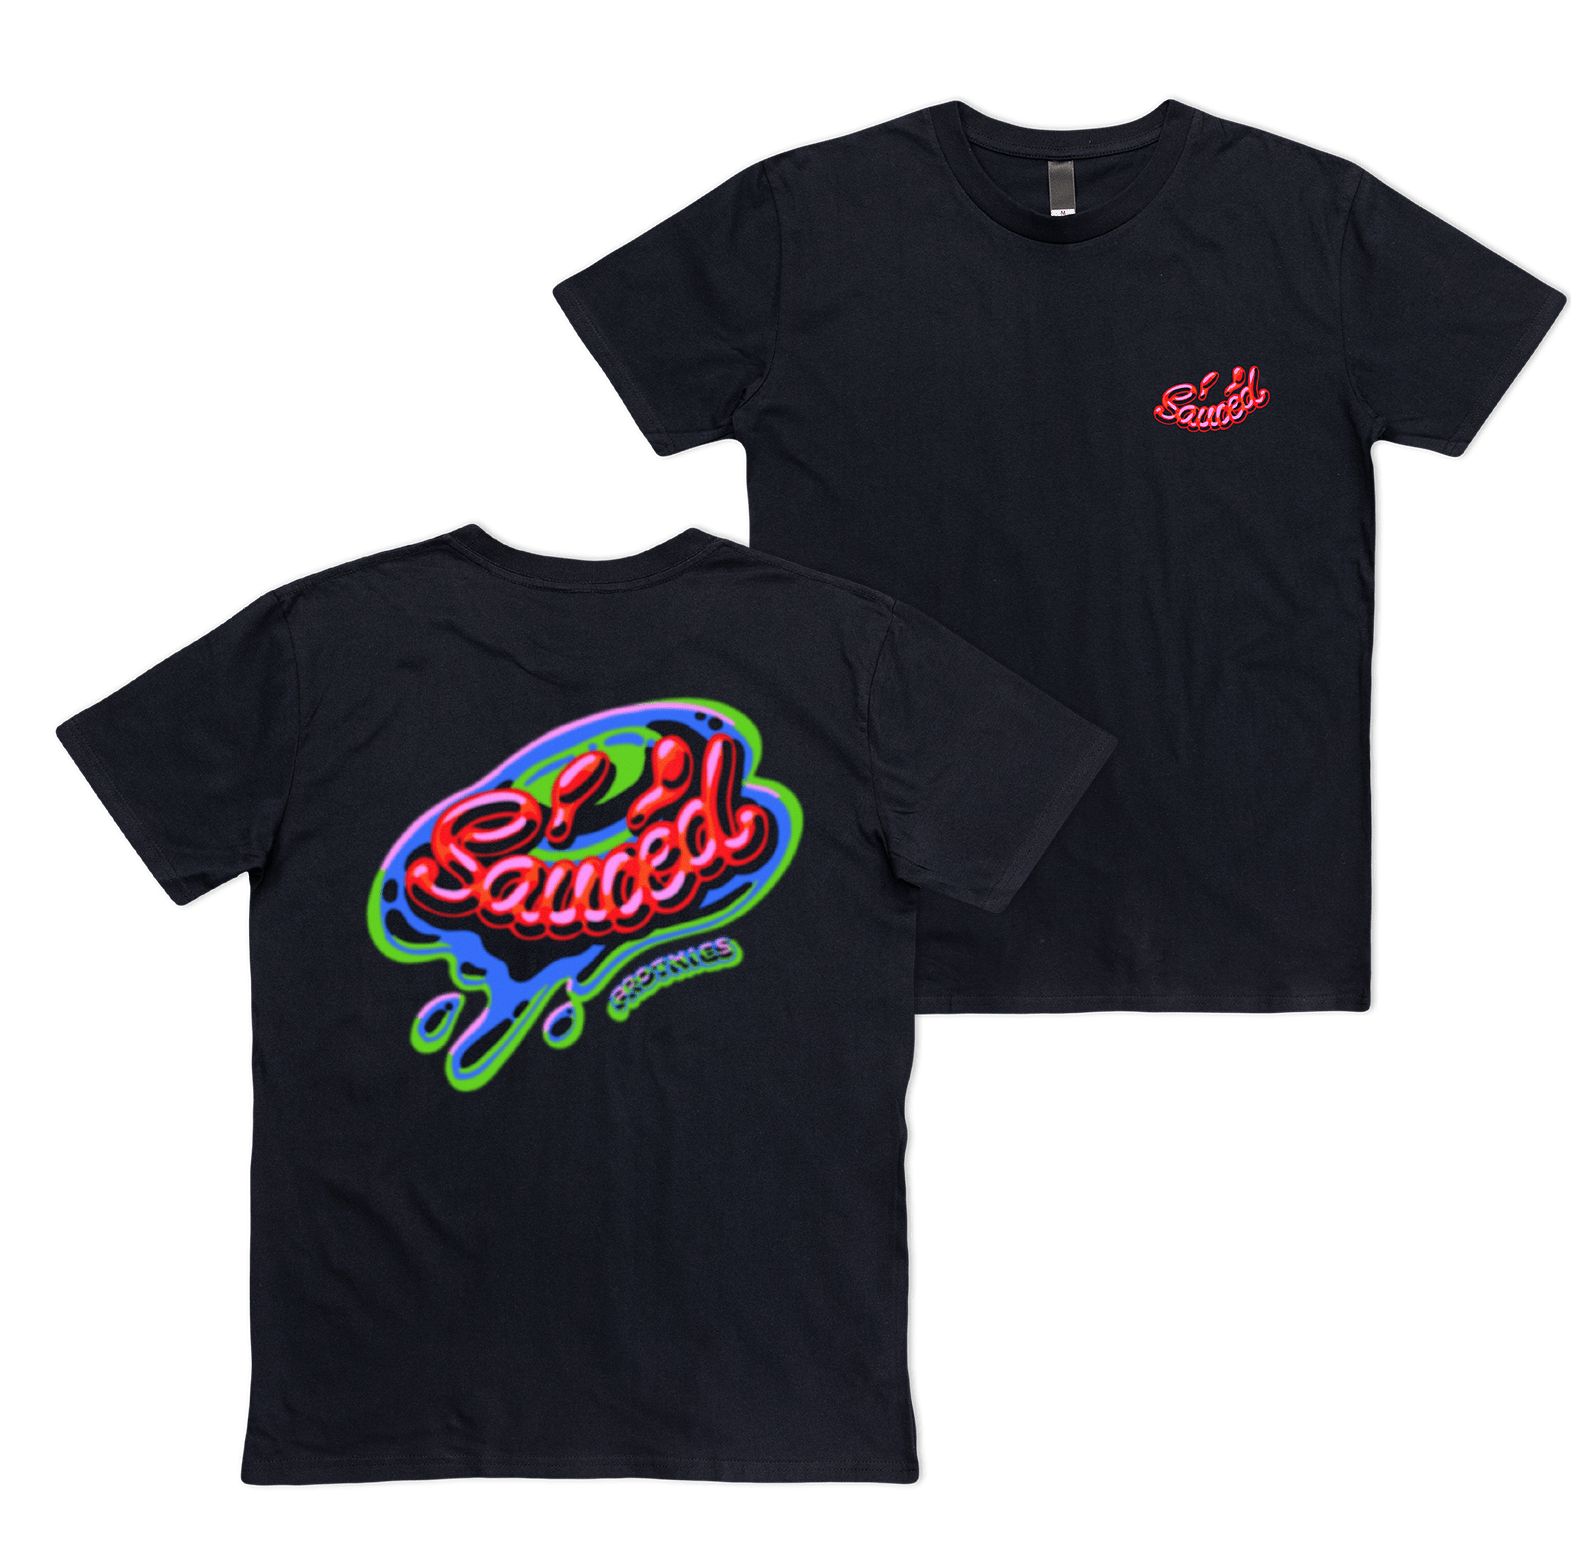 Sauced Tee T-Shirt Frothies